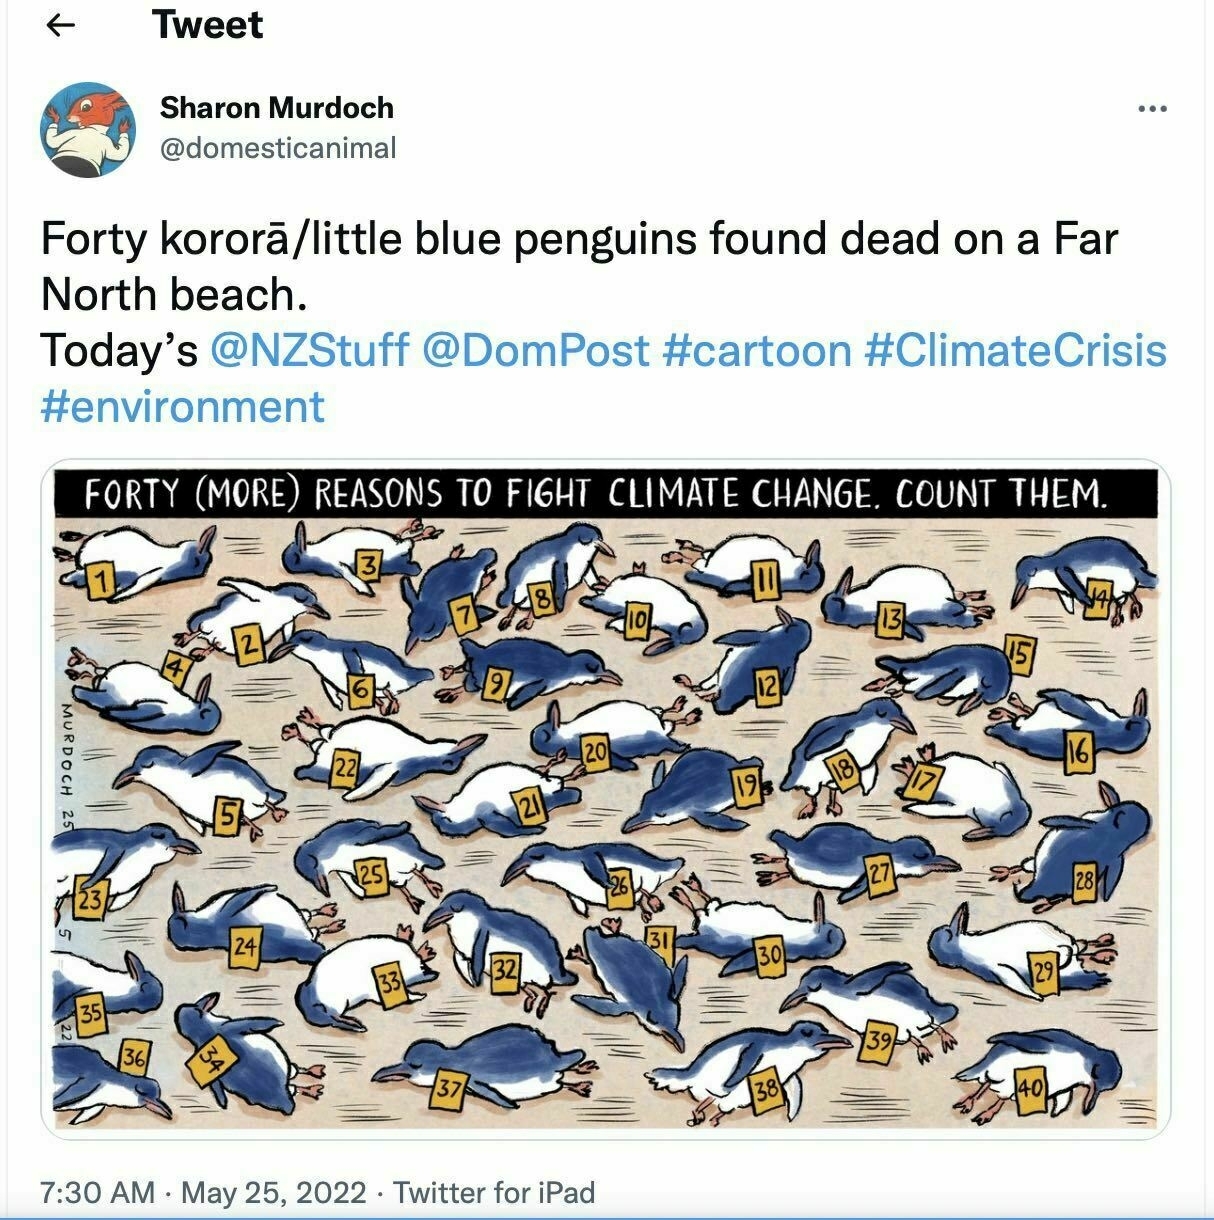 Cartoon shows 40 numbered little blue penguins lying dead on a beach. 